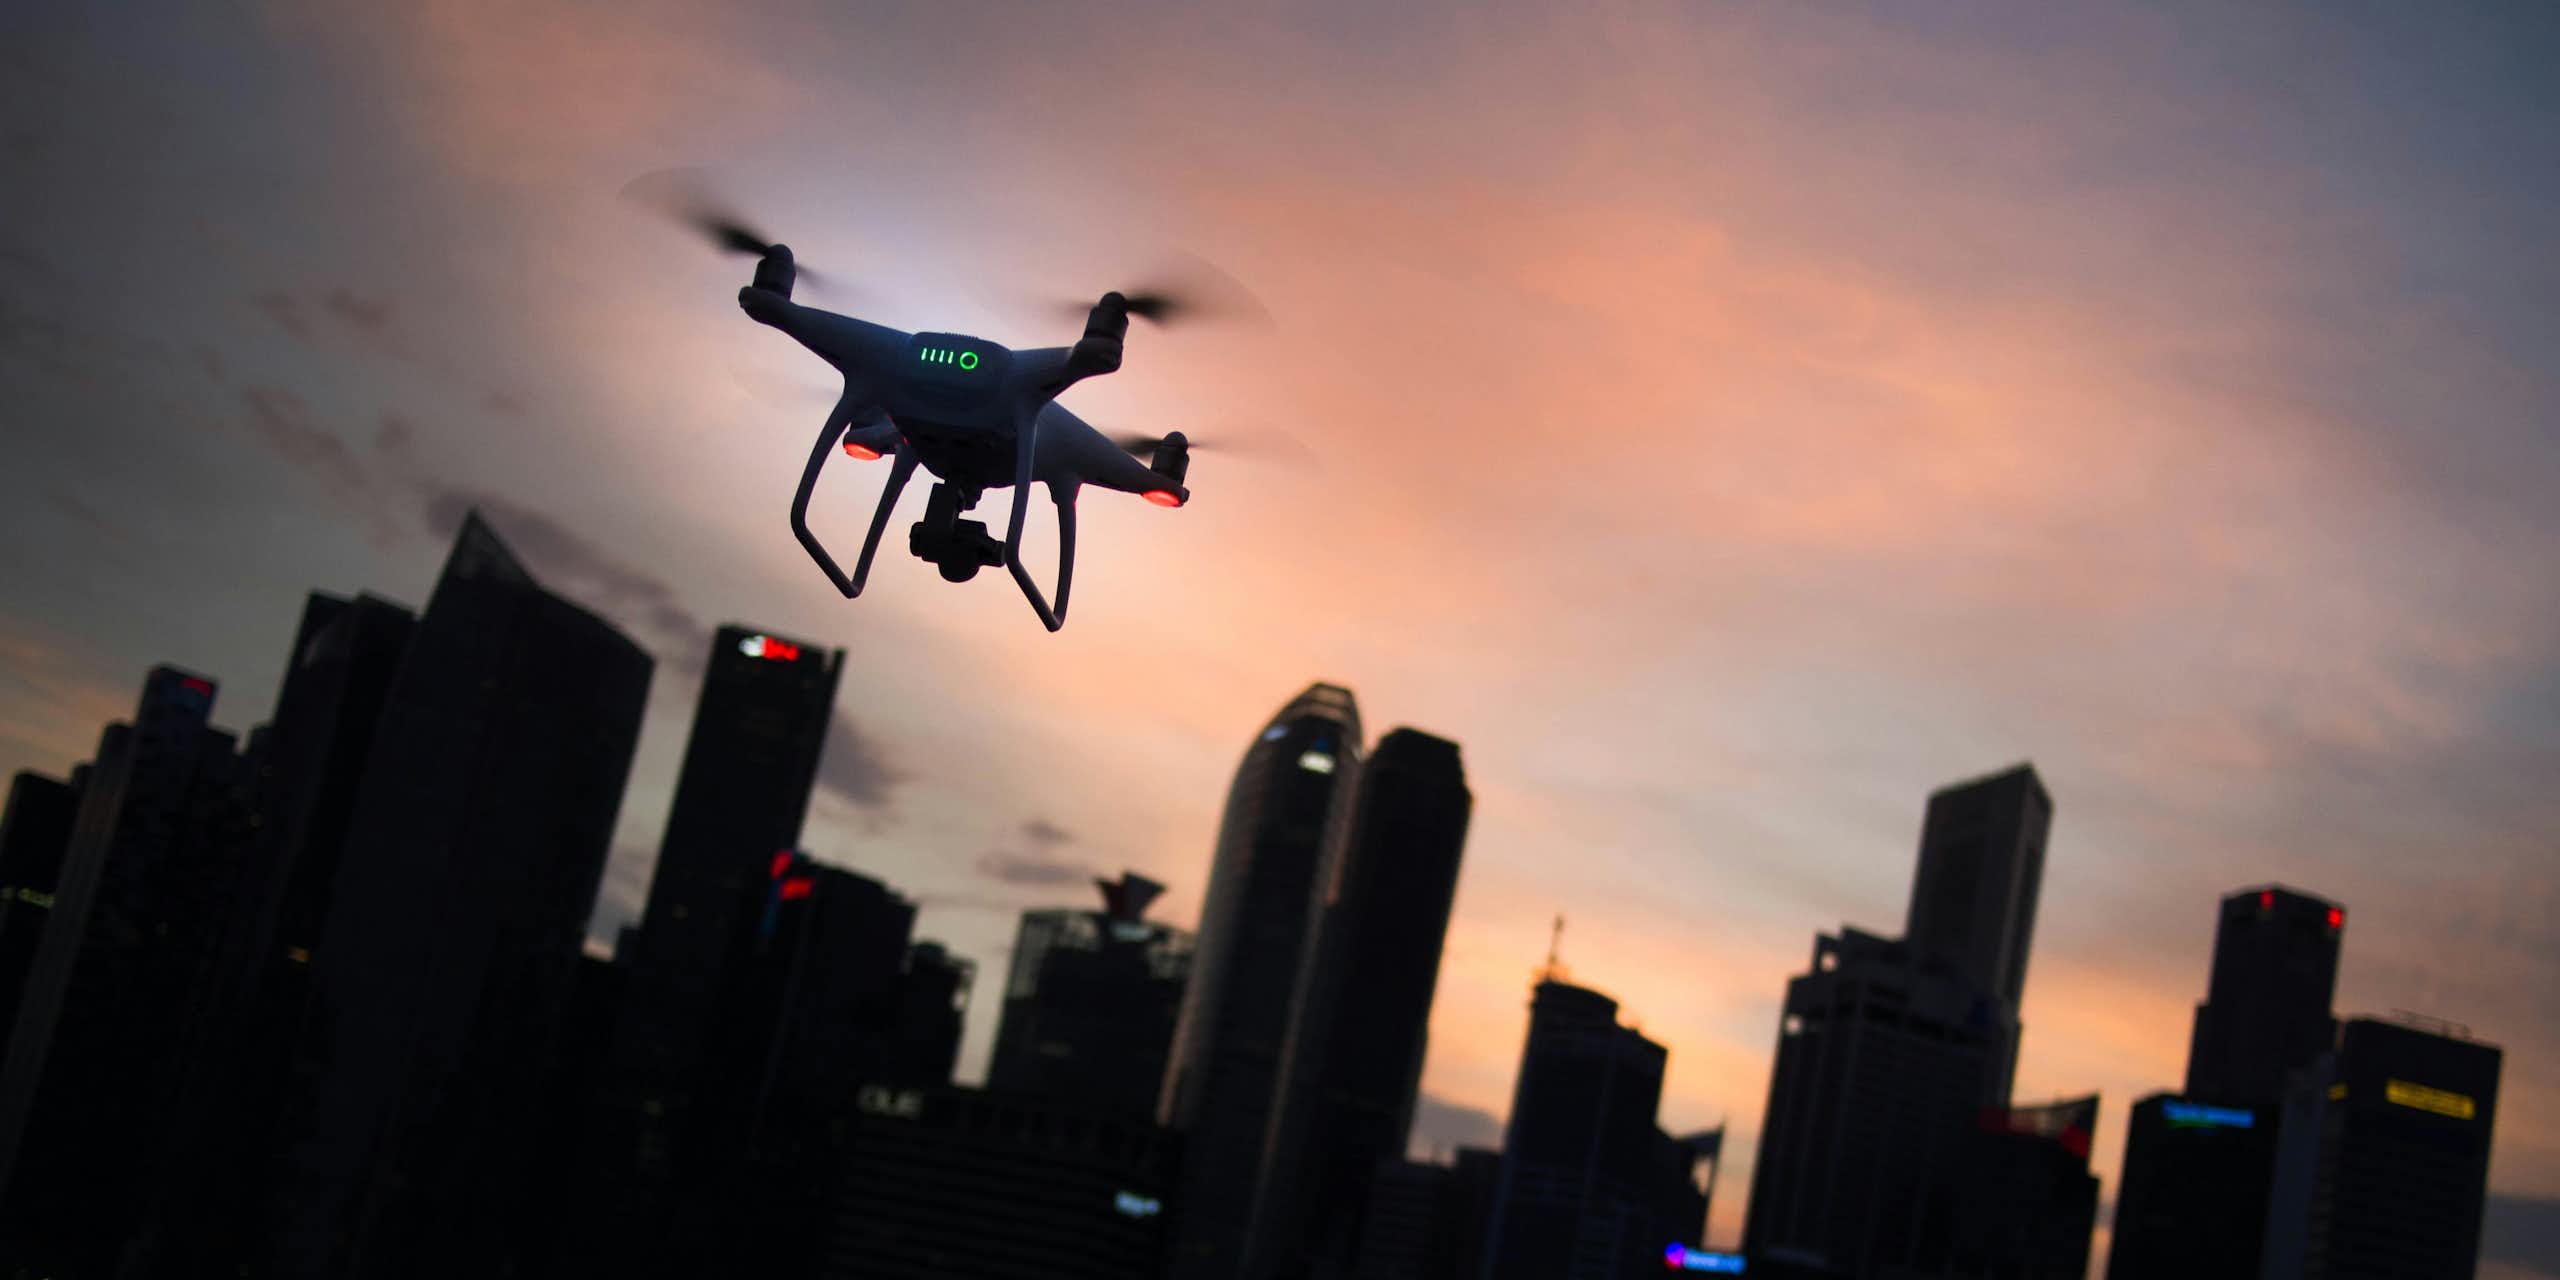 Photo of a quadcopter drone in flight with a city in the background.